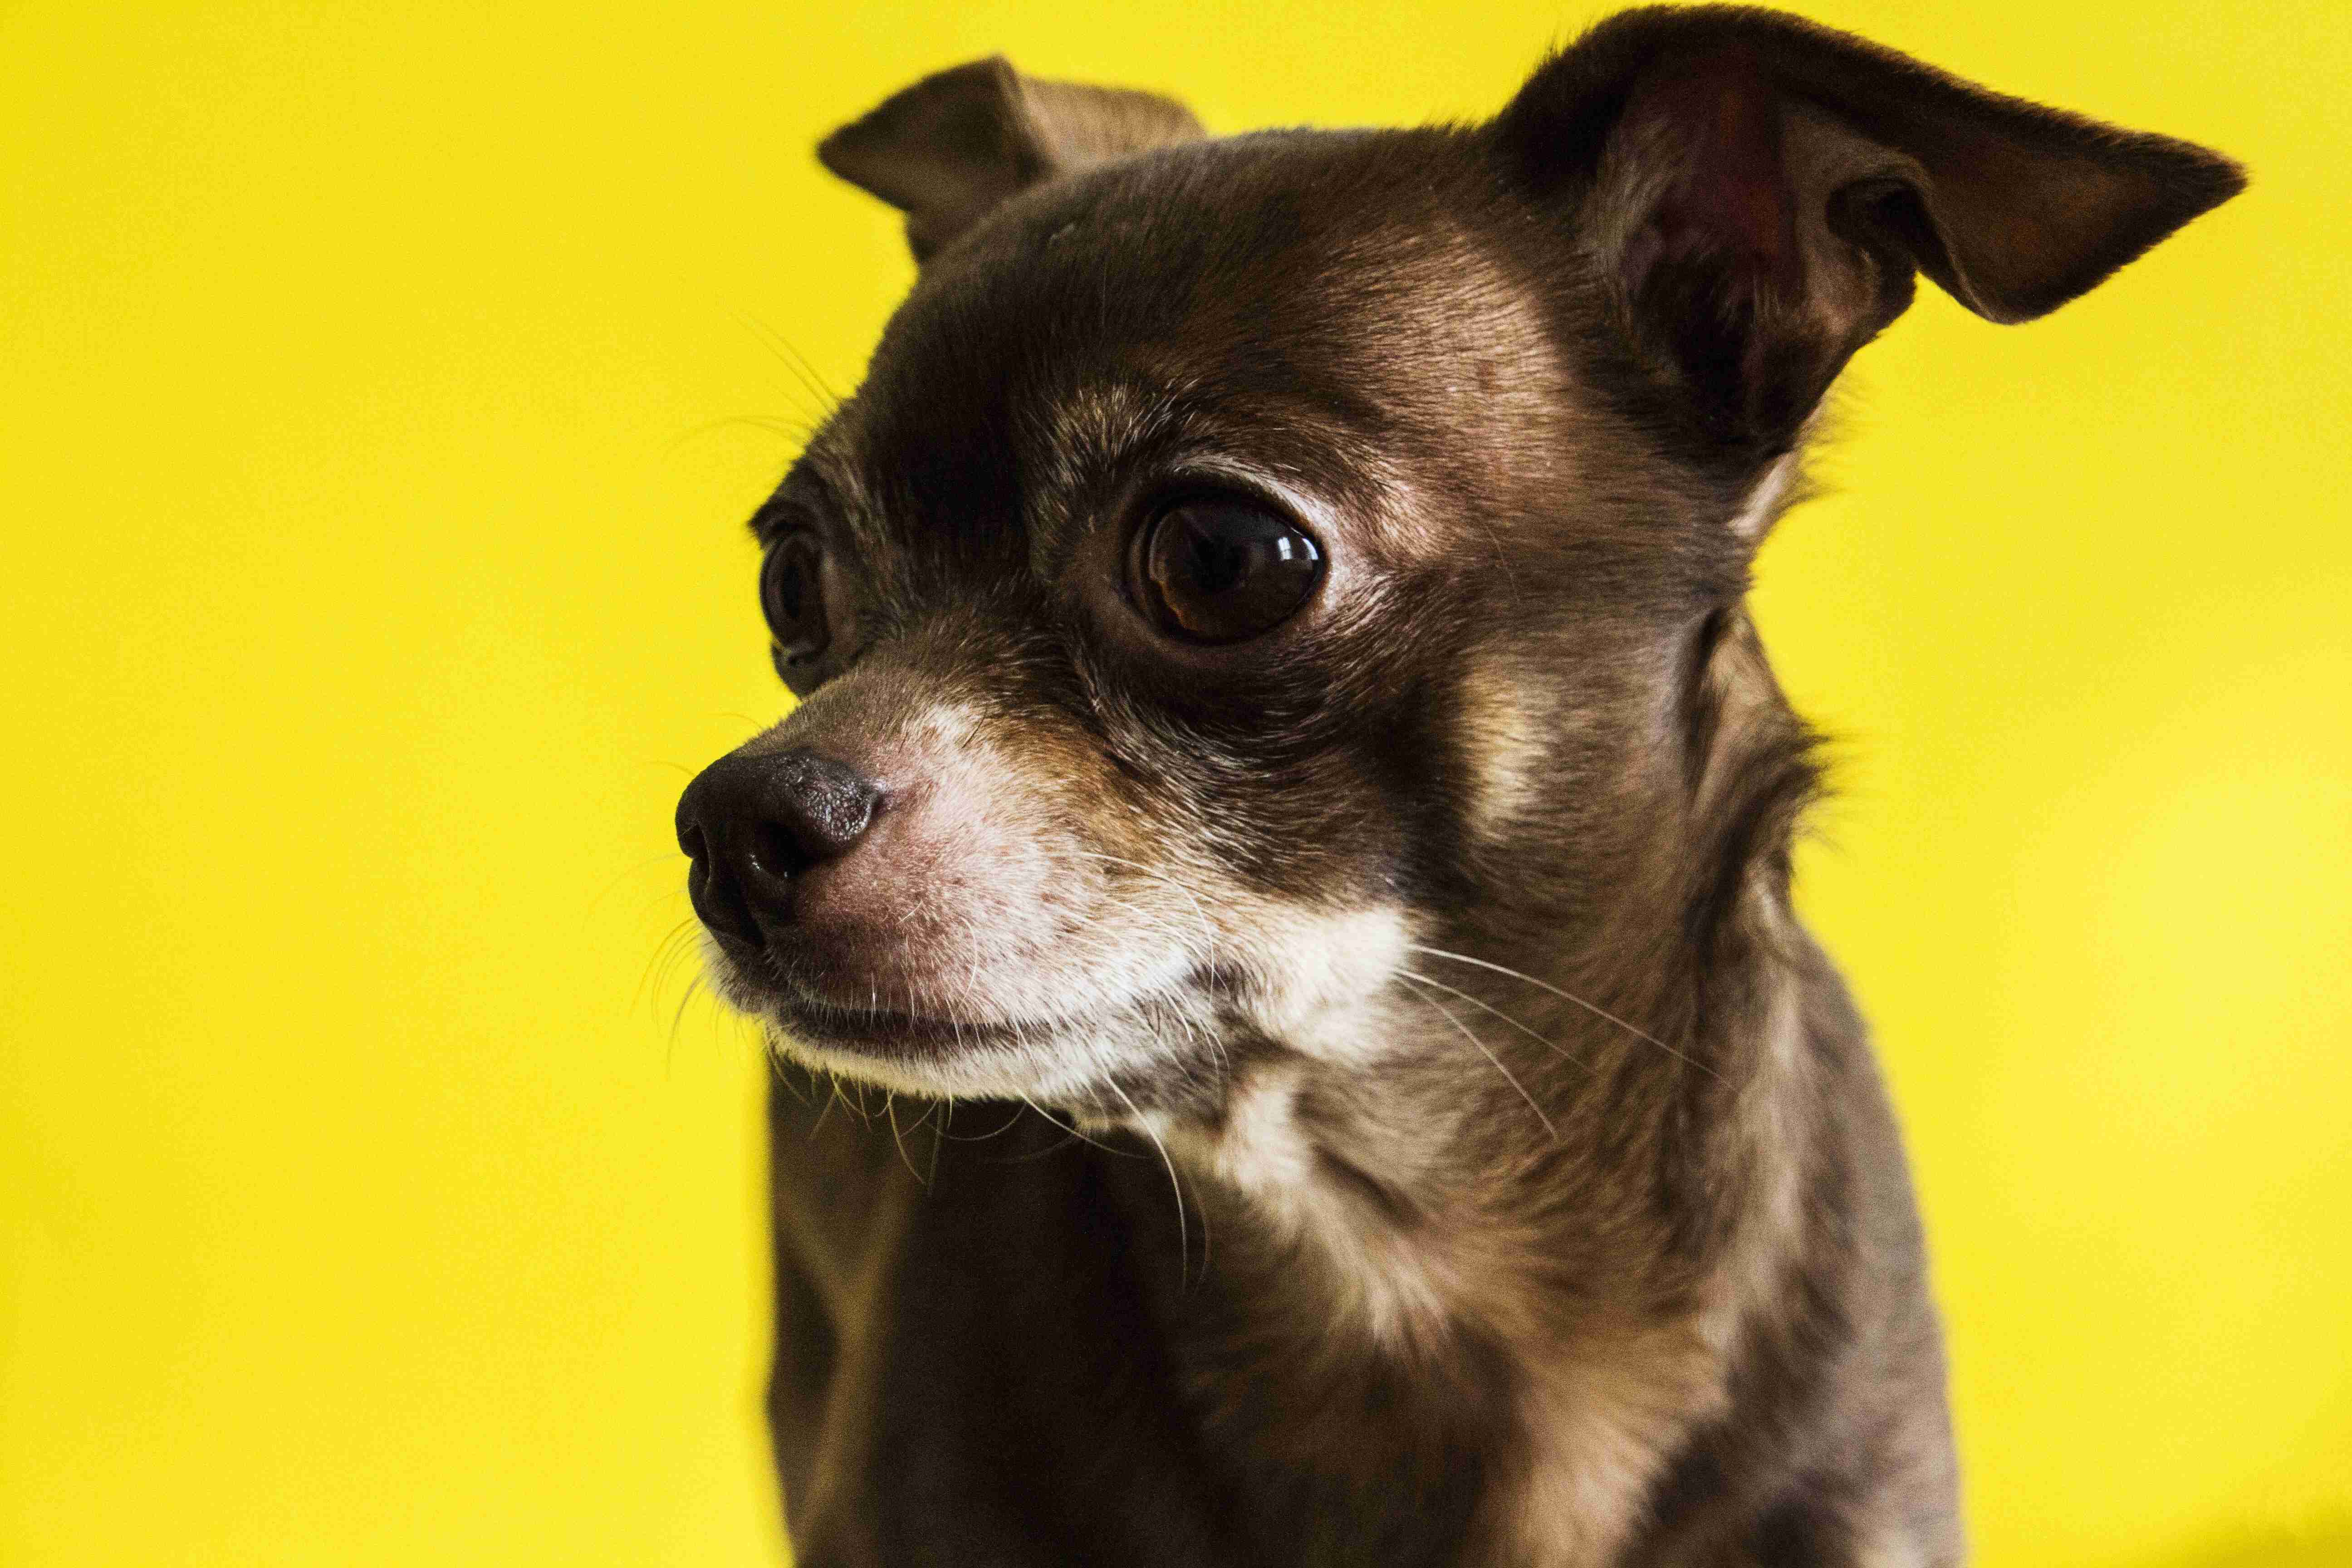 What are some signs that a Chihuahua is becoming angry or agitated?